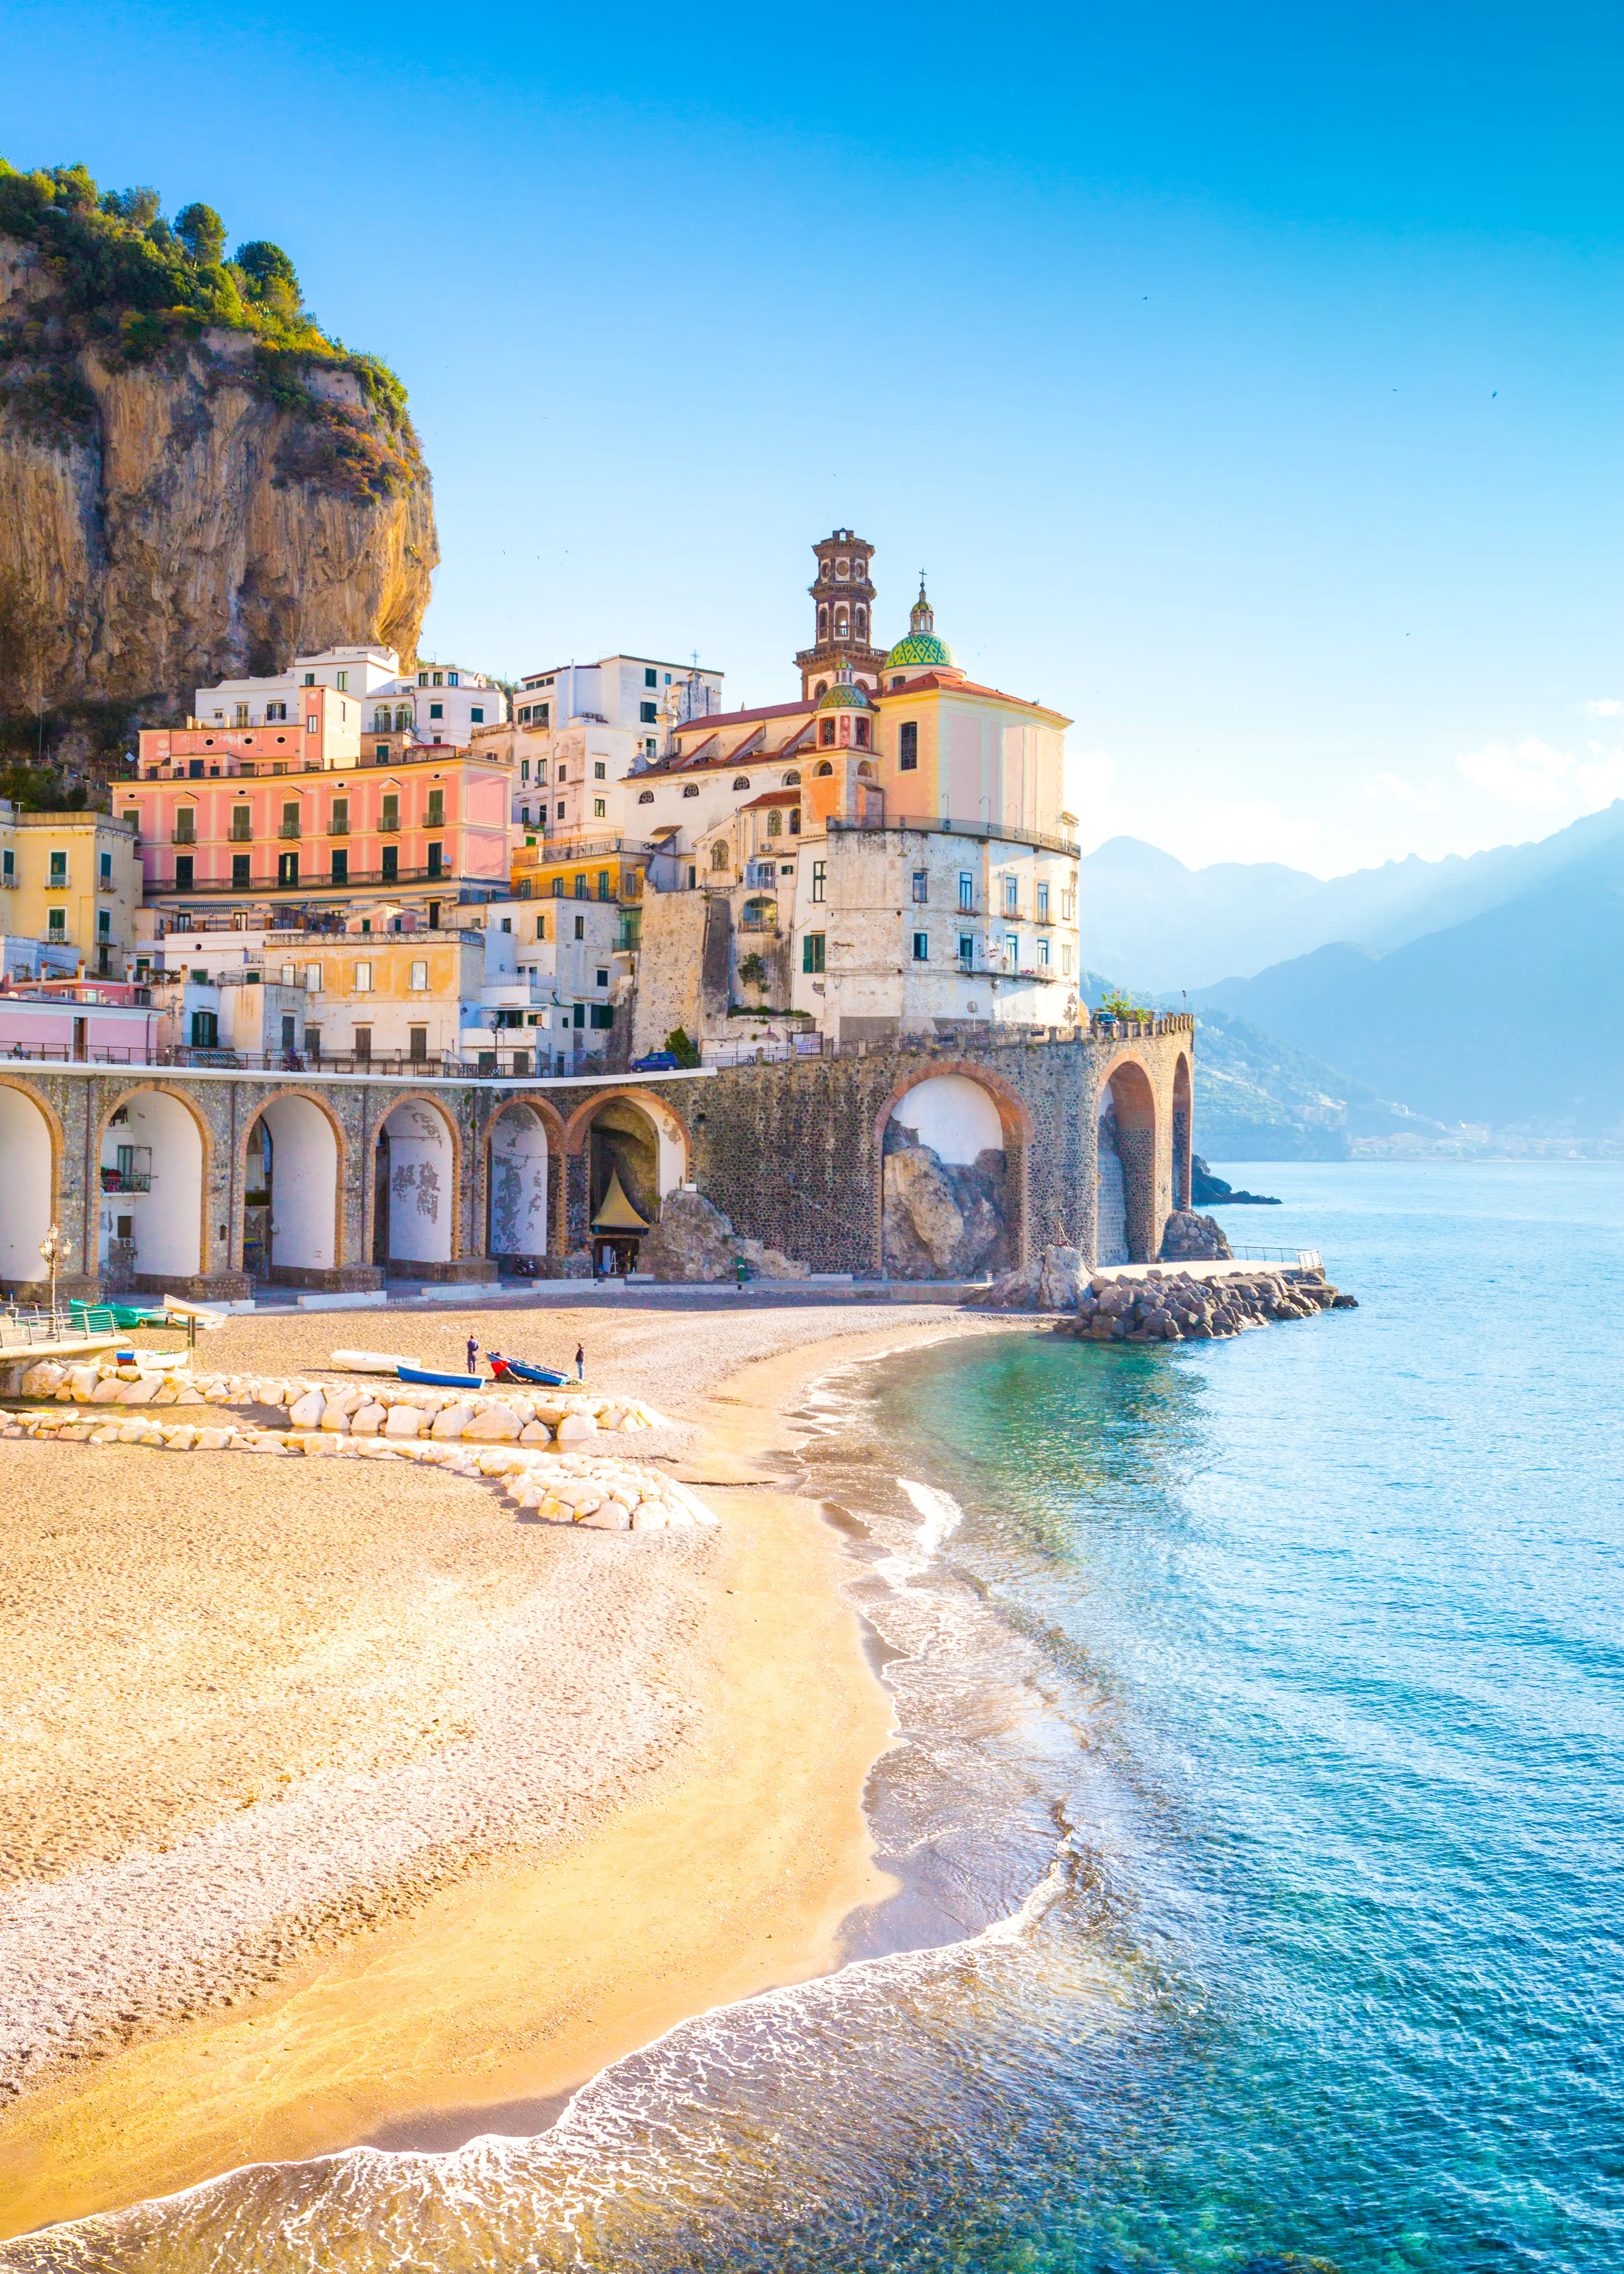 3-Day Family Adventure and Relaxation in Hidden Amalfi Coast